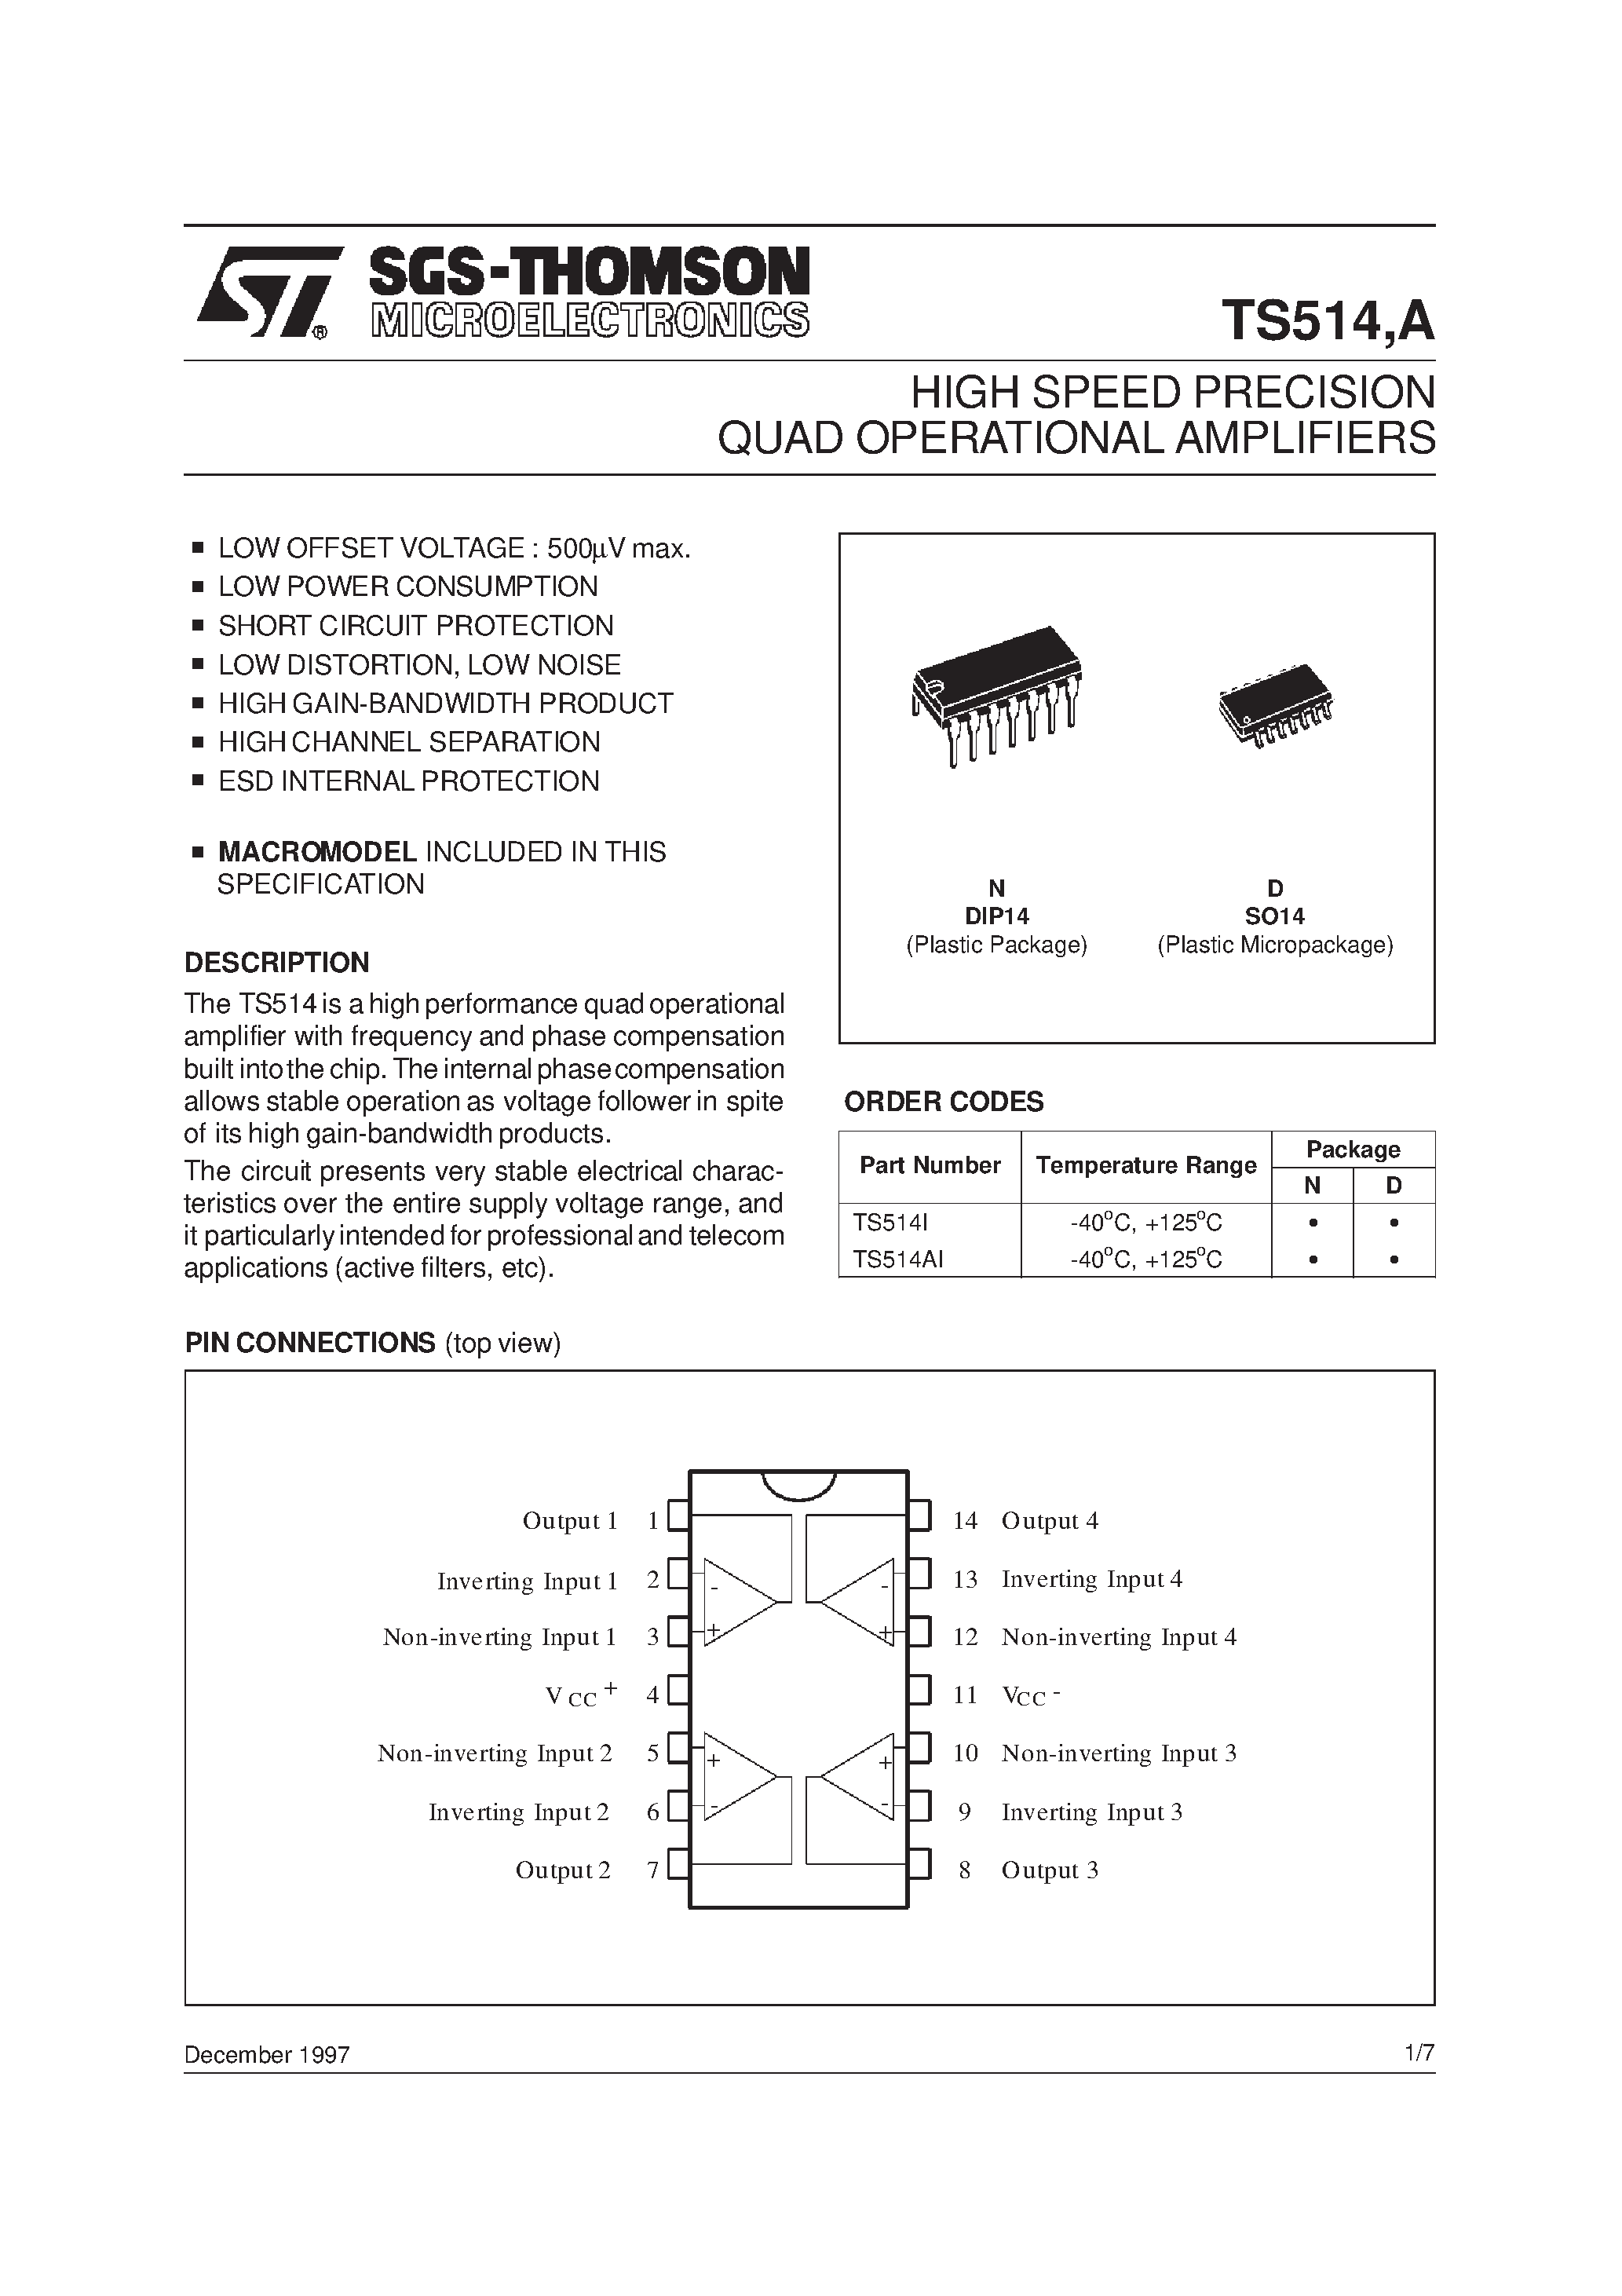 Datasheet TS514A - HIGH SPEED PRECISION QUAD OPERATIONAL AMPLIFIERS page 1